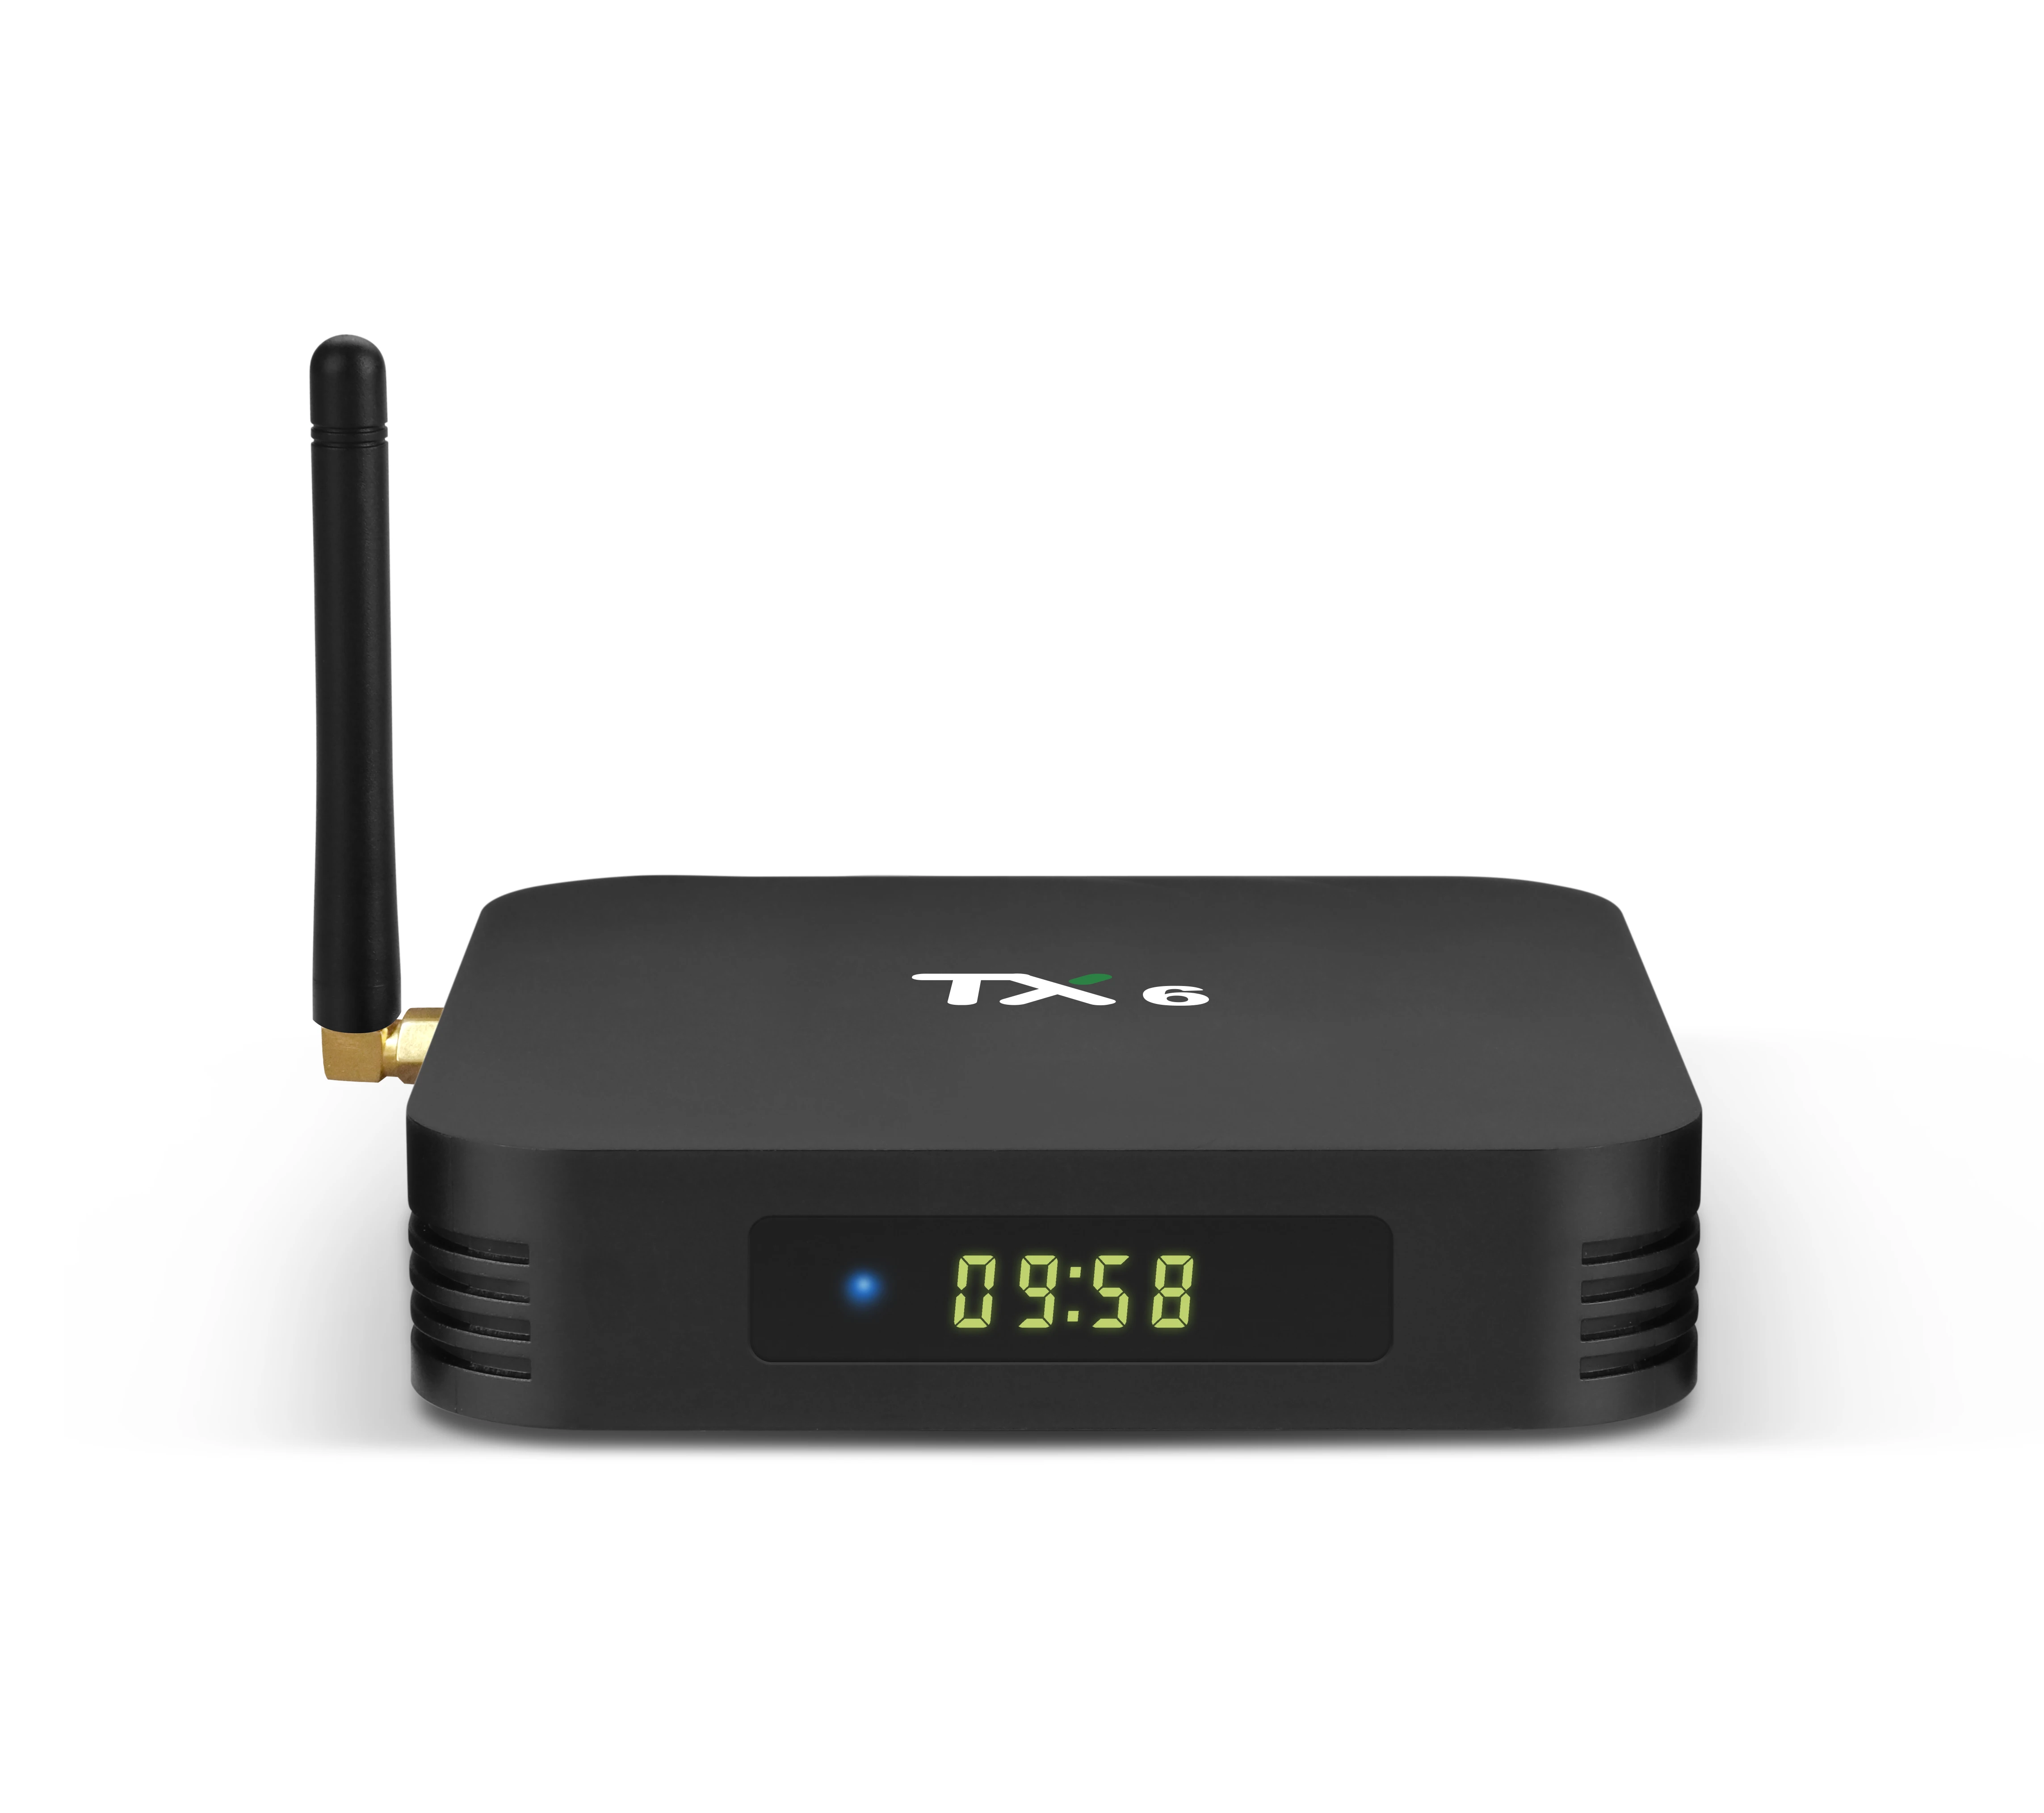 Cheapest Android TV Box Tanix TX6 Android 9.0 OS 2G16G 4G32G With USB 3.0 Dual Band WIFI Support 4K Youtube IPTV box